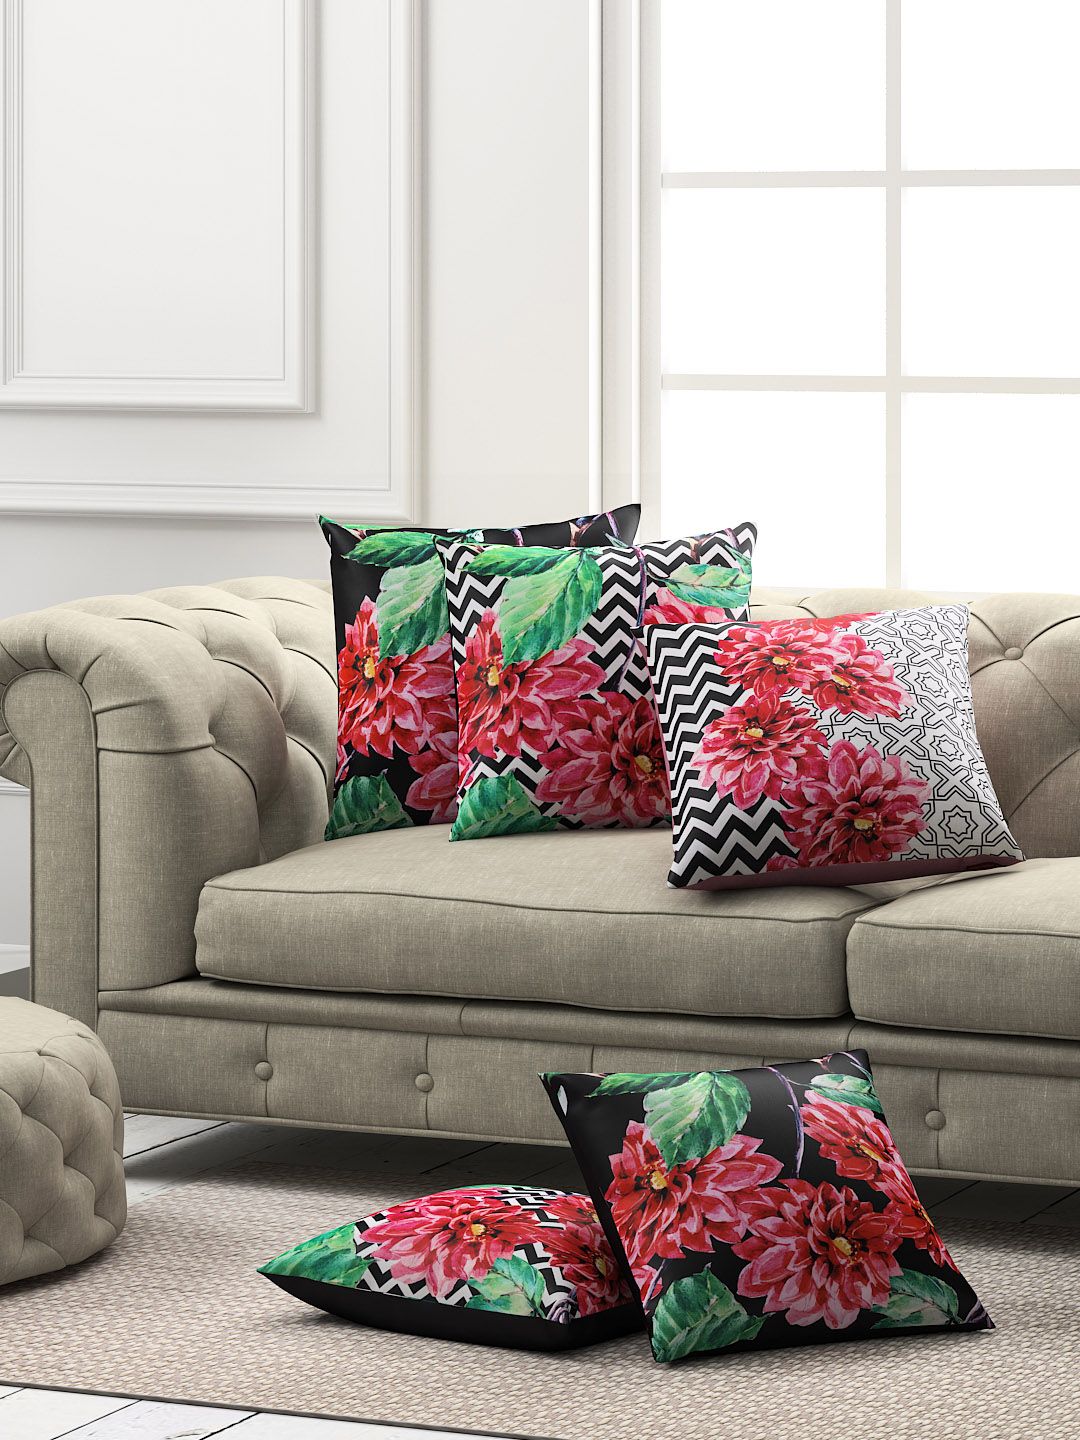 SEJ by Nisha Gupta Set of 5 Floral Square Cushion Covers Price in India